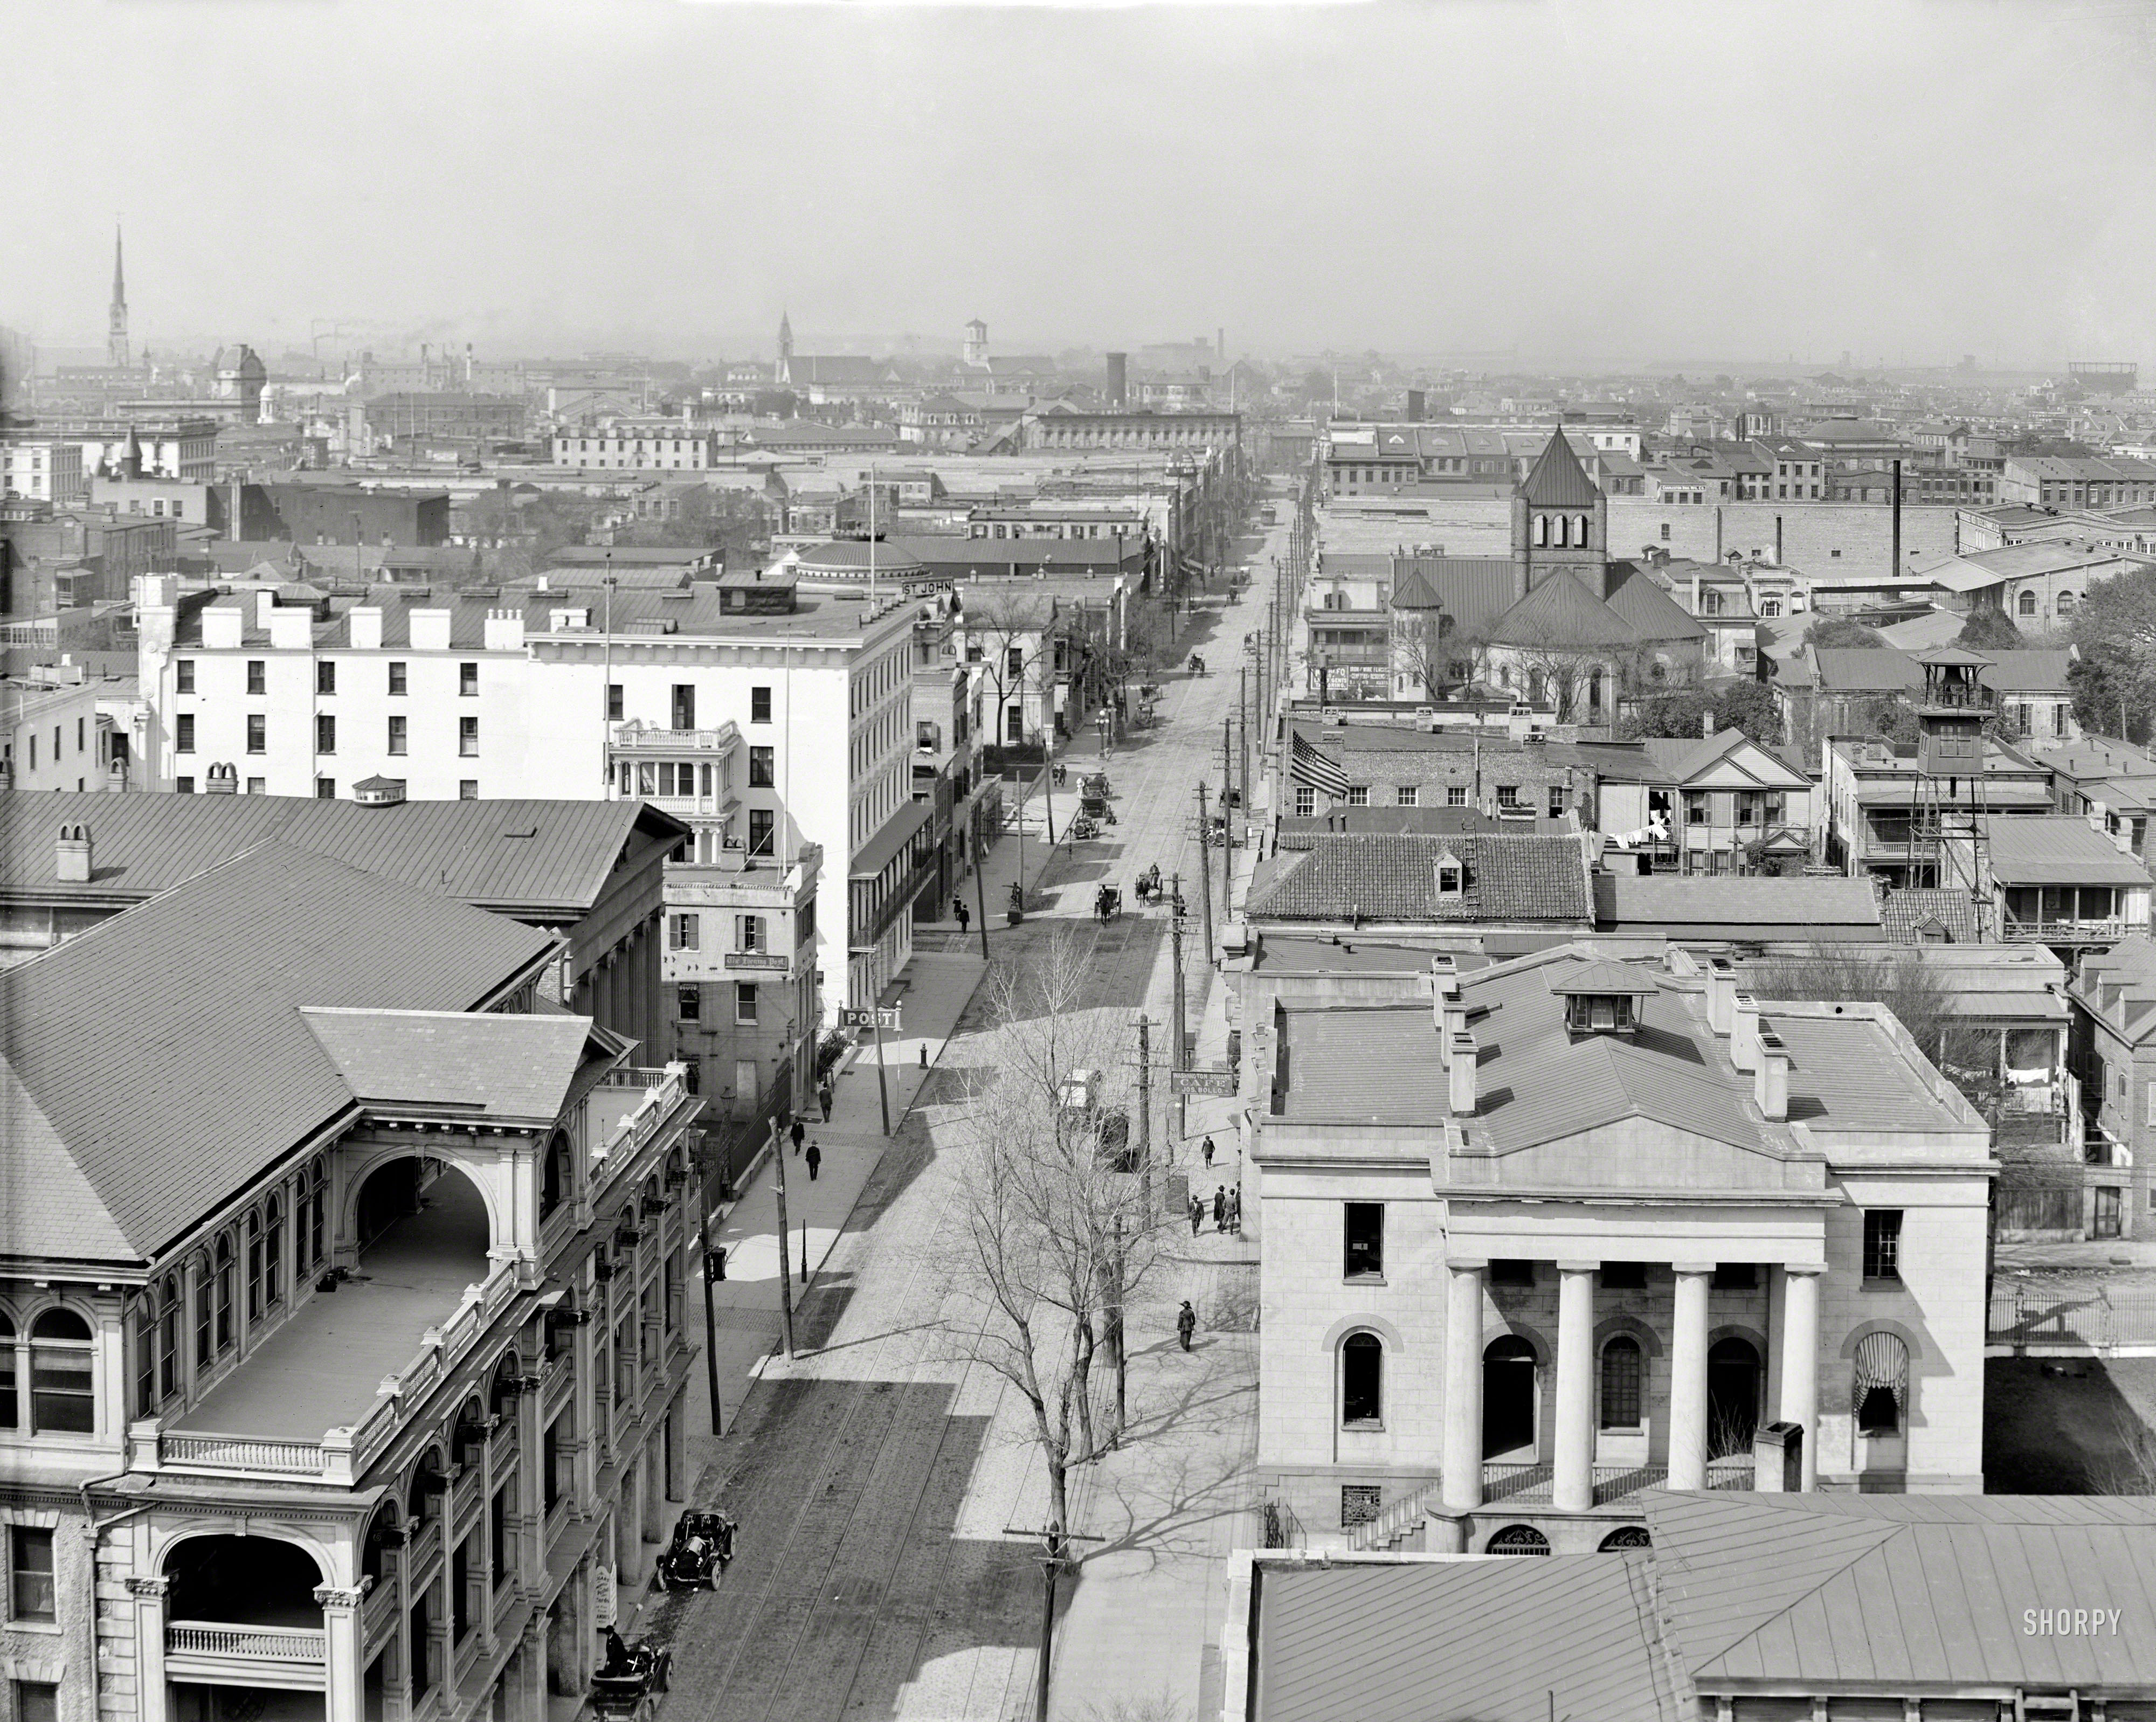 Charleston, South Carolina, circa 1911. "Meeting Street from St. Michael's Church." Our second installment of this multi-part panorama, with a nice view of the Fireproof Building and its Doric portico. 8x10 glass negative. View full size.